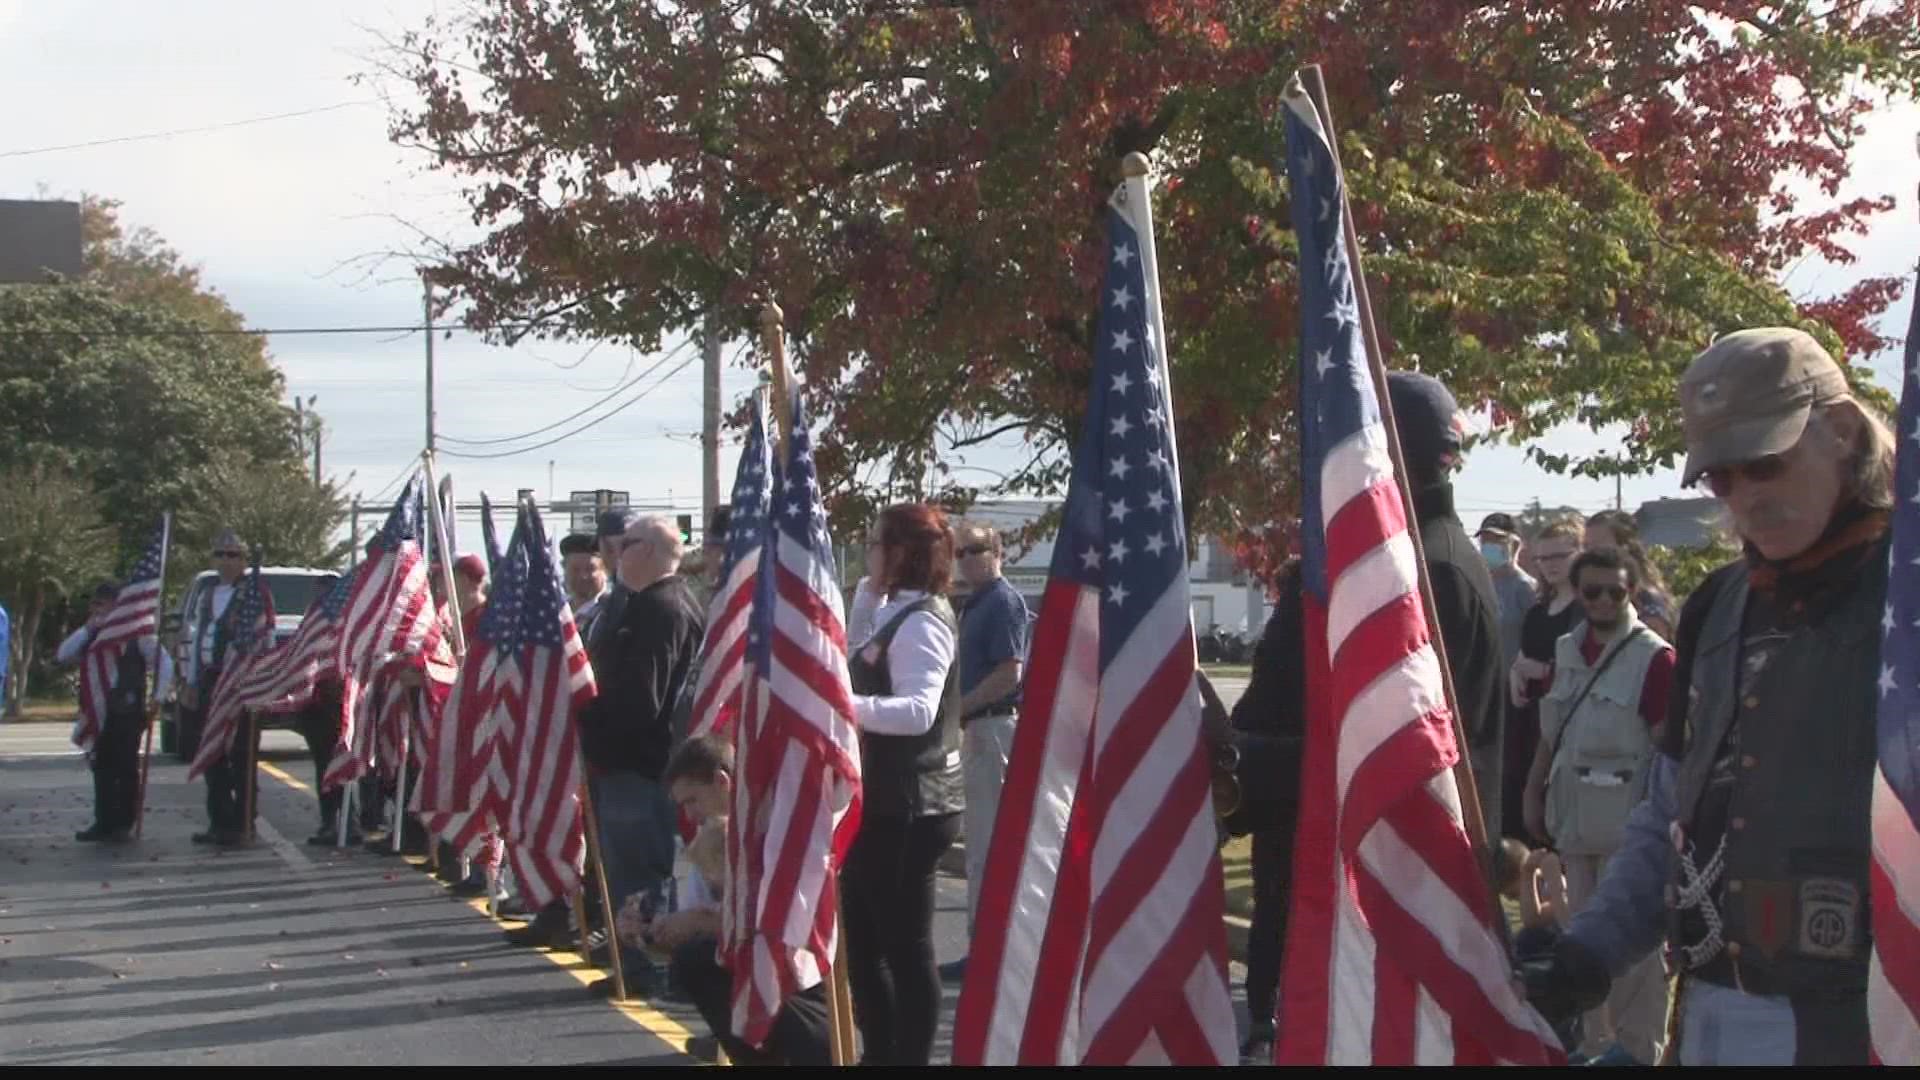 Thursday, community leaders, military families, and more gathered to honor veterans all over Central Georgia in many 11/11 services.